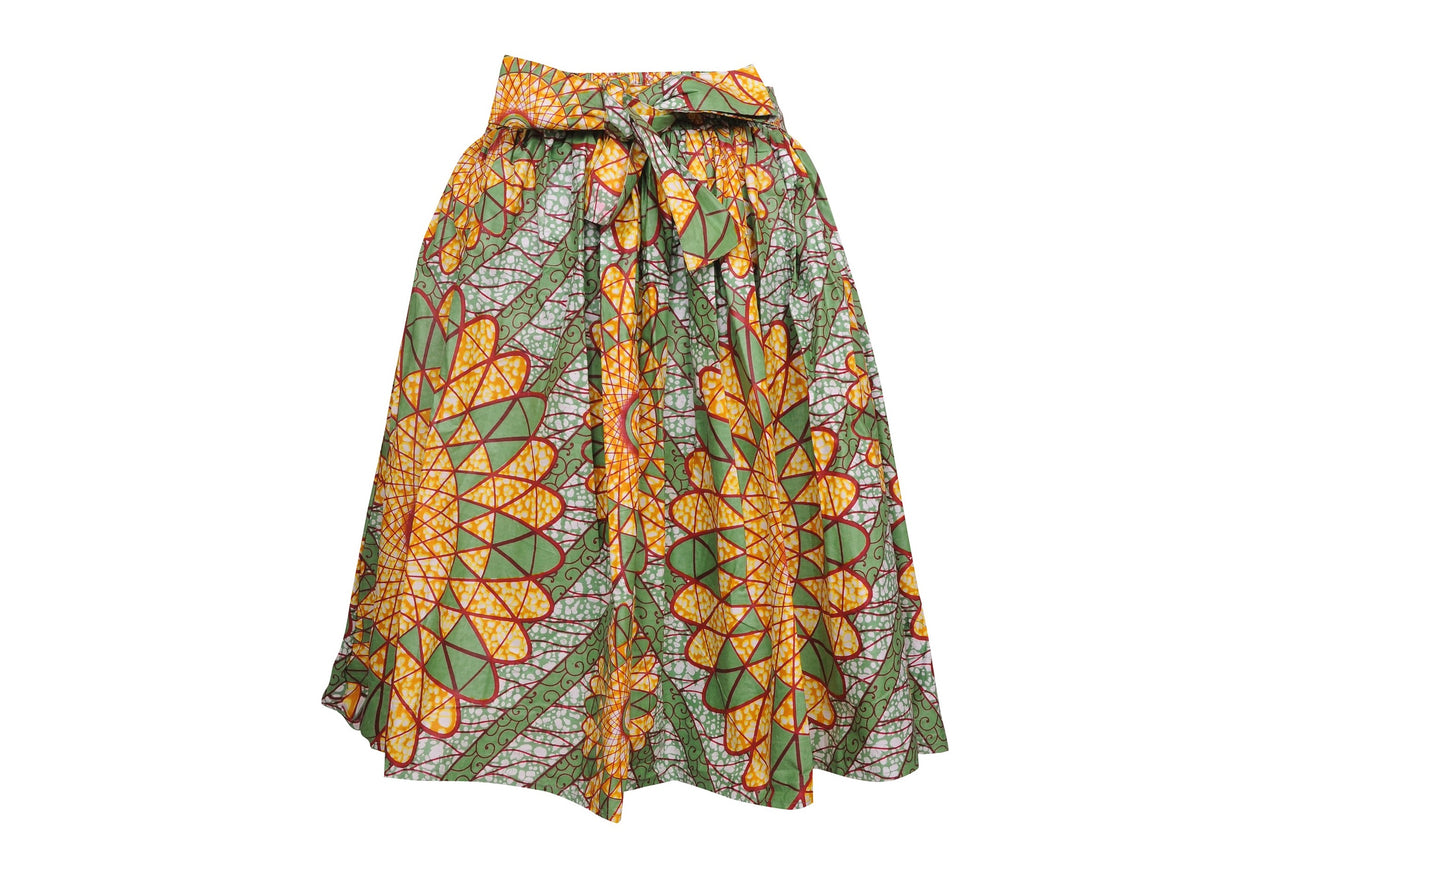 Traditional African Print Cotton Skirts (Knee Length)